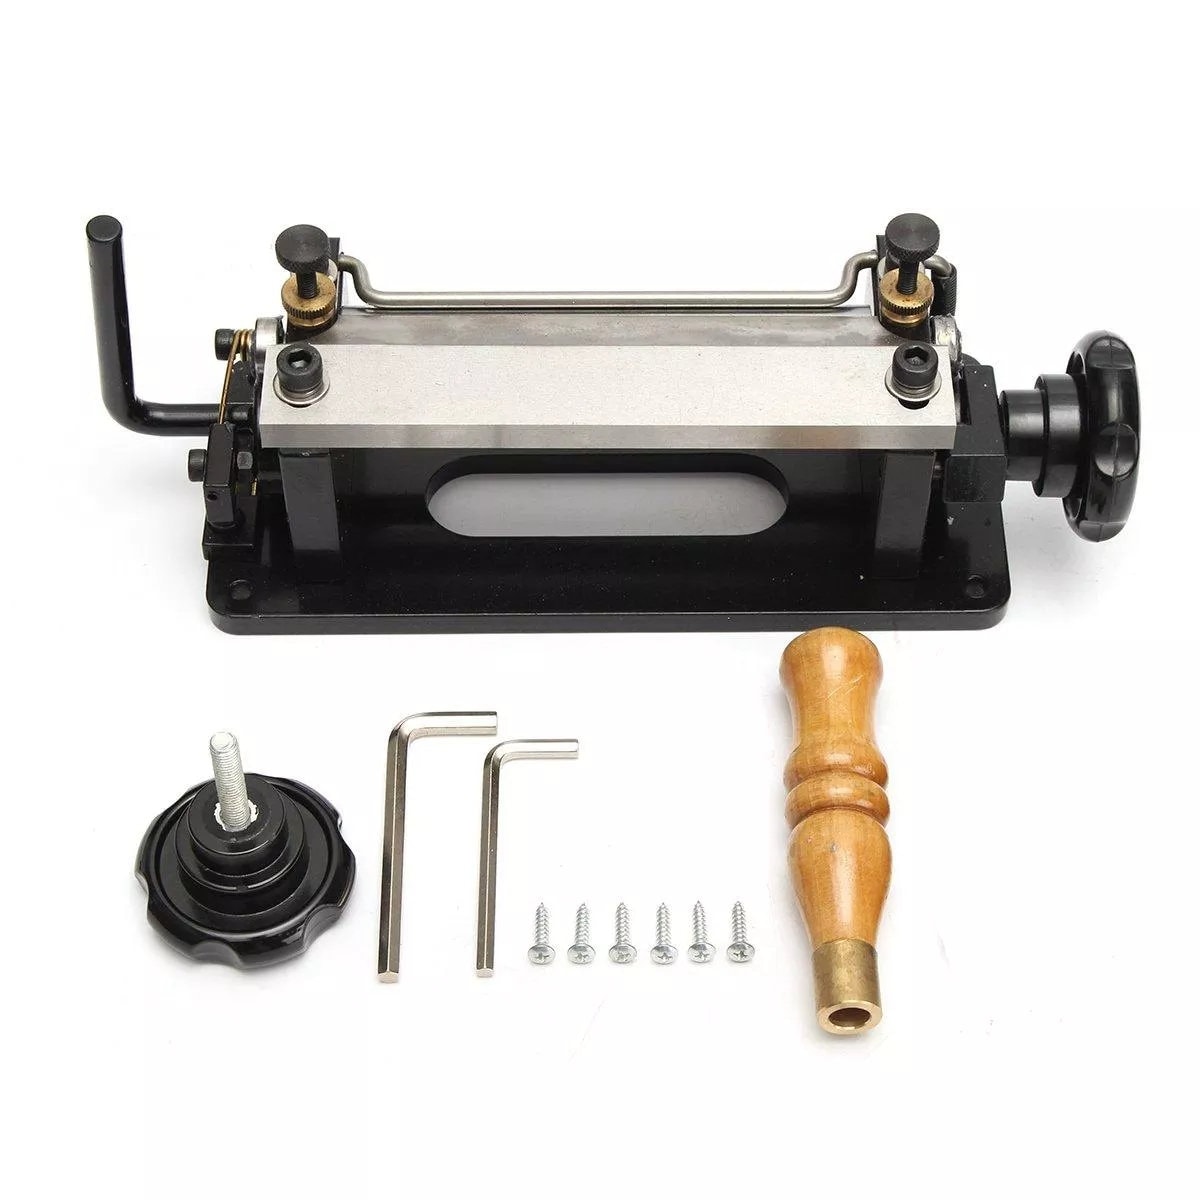 Manual Leather Skiver Leather Splitter Paring Machine Leather Craft Edge Skiving with 18mm Art Blade Manual DIY Leather Skiver Peeler Splitter 18mm